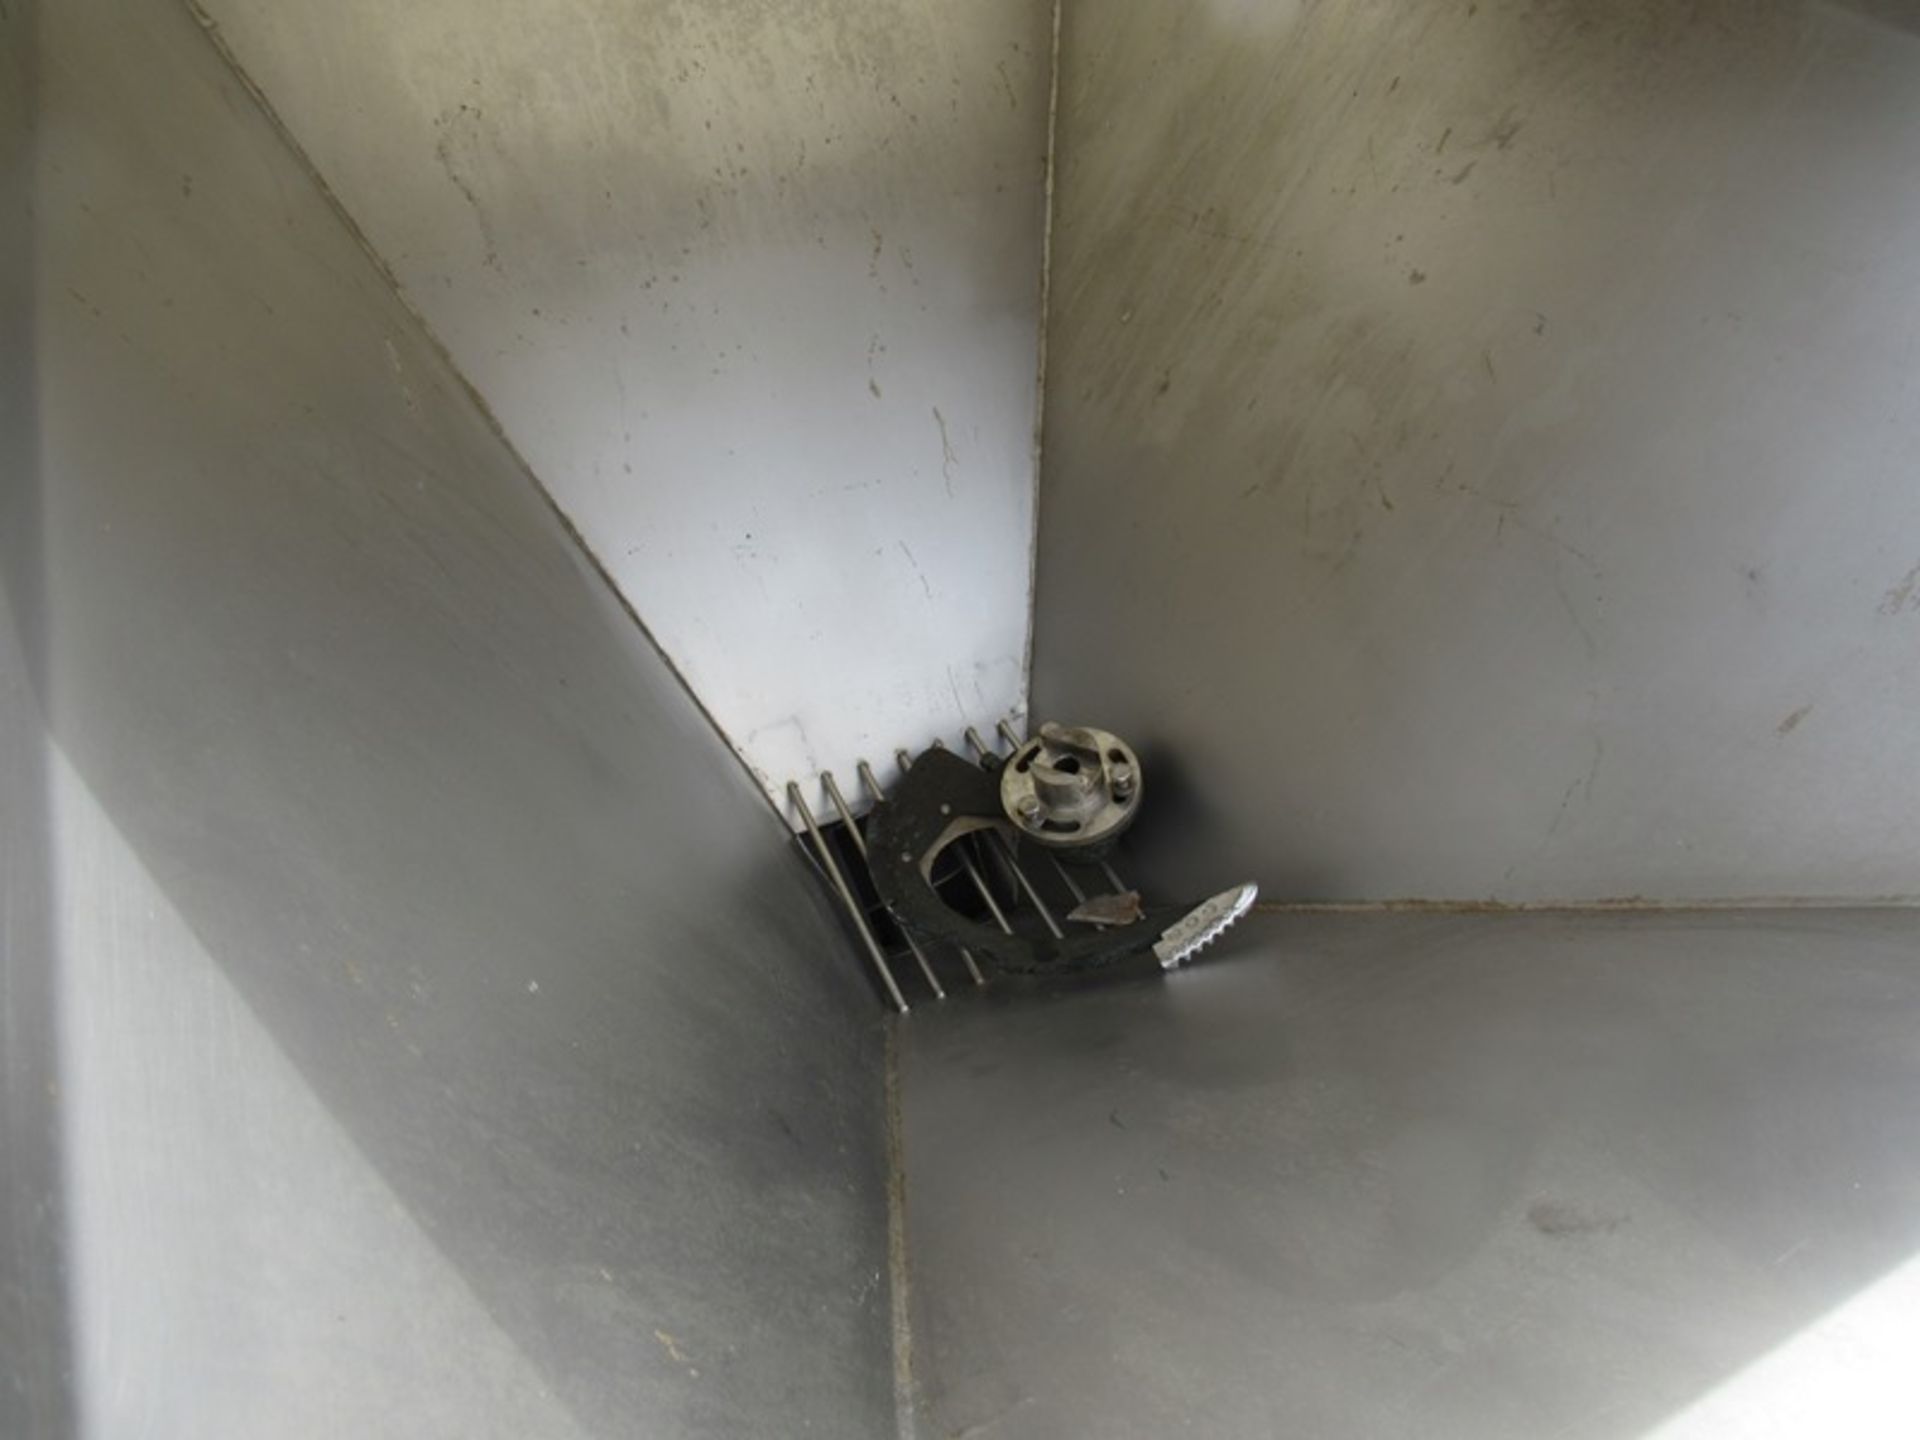 Stainless Steel Screw Conveyor, 6" Dia. X 6' L screw, 3' W X 4' L X 3' D hopper (Required Loading - Image 3 of 3